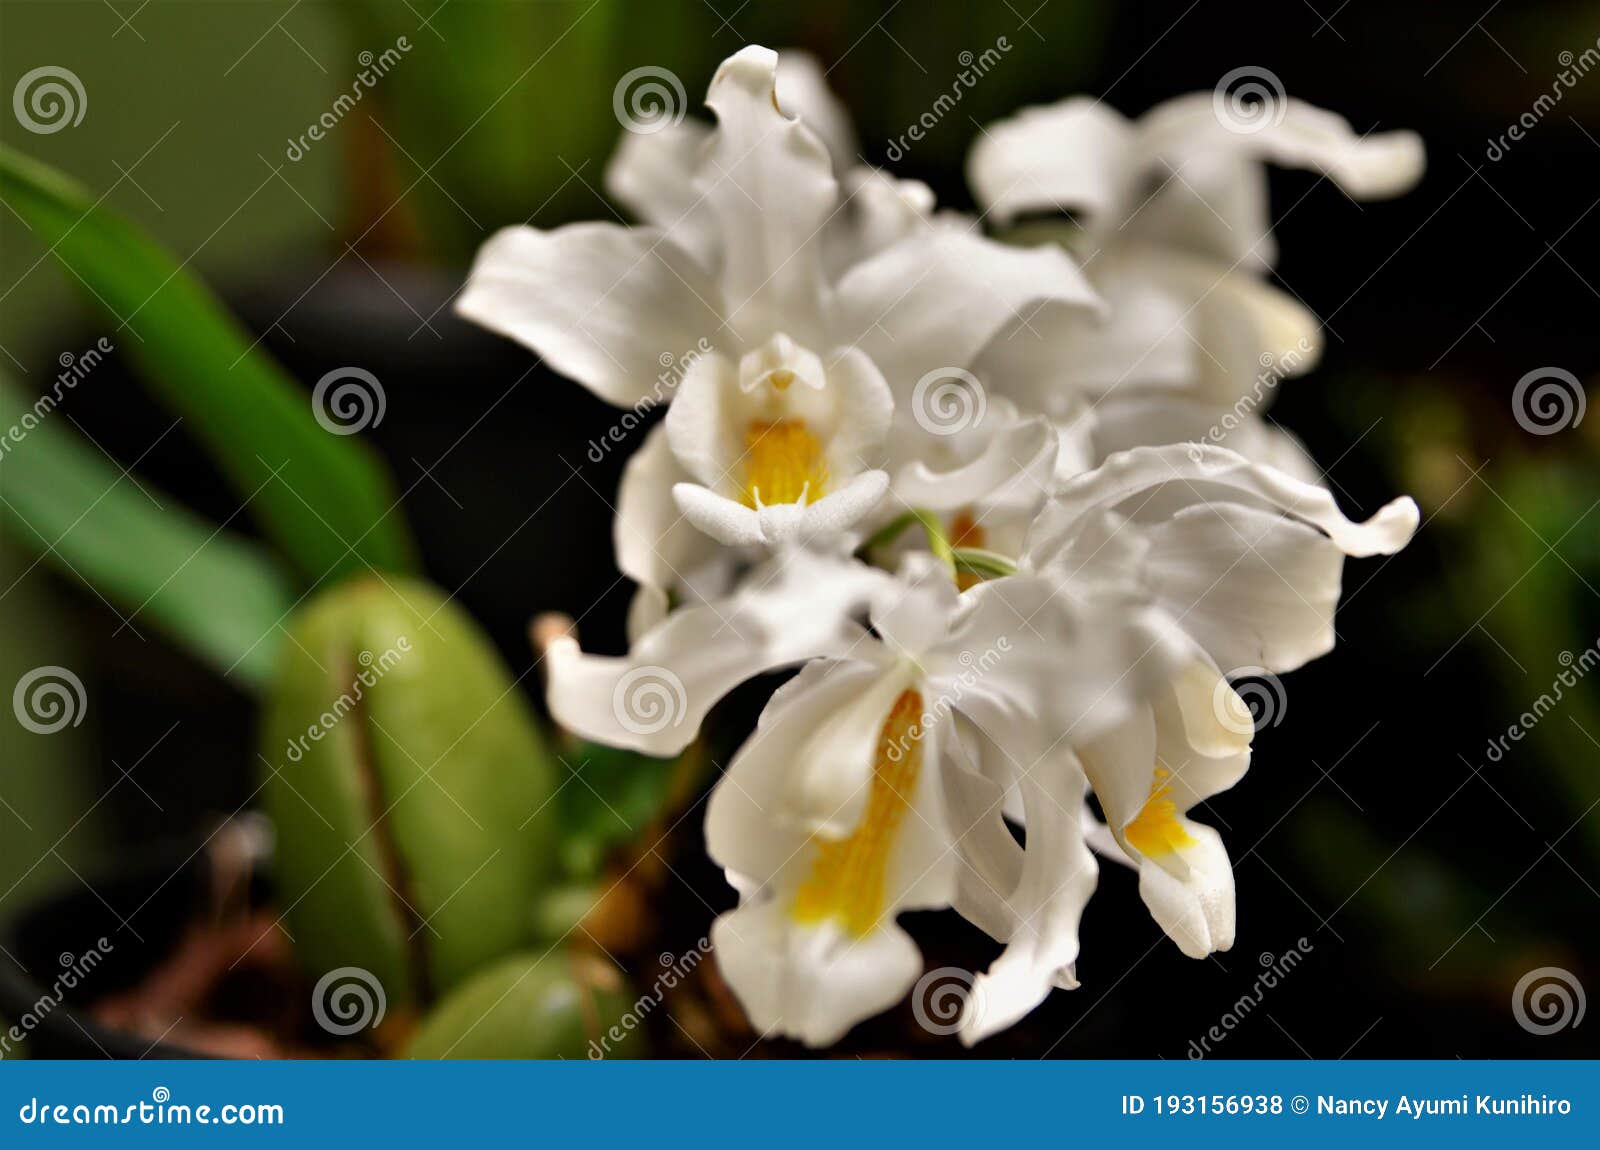 beautiful flowers of the orchid coelogyne cristata